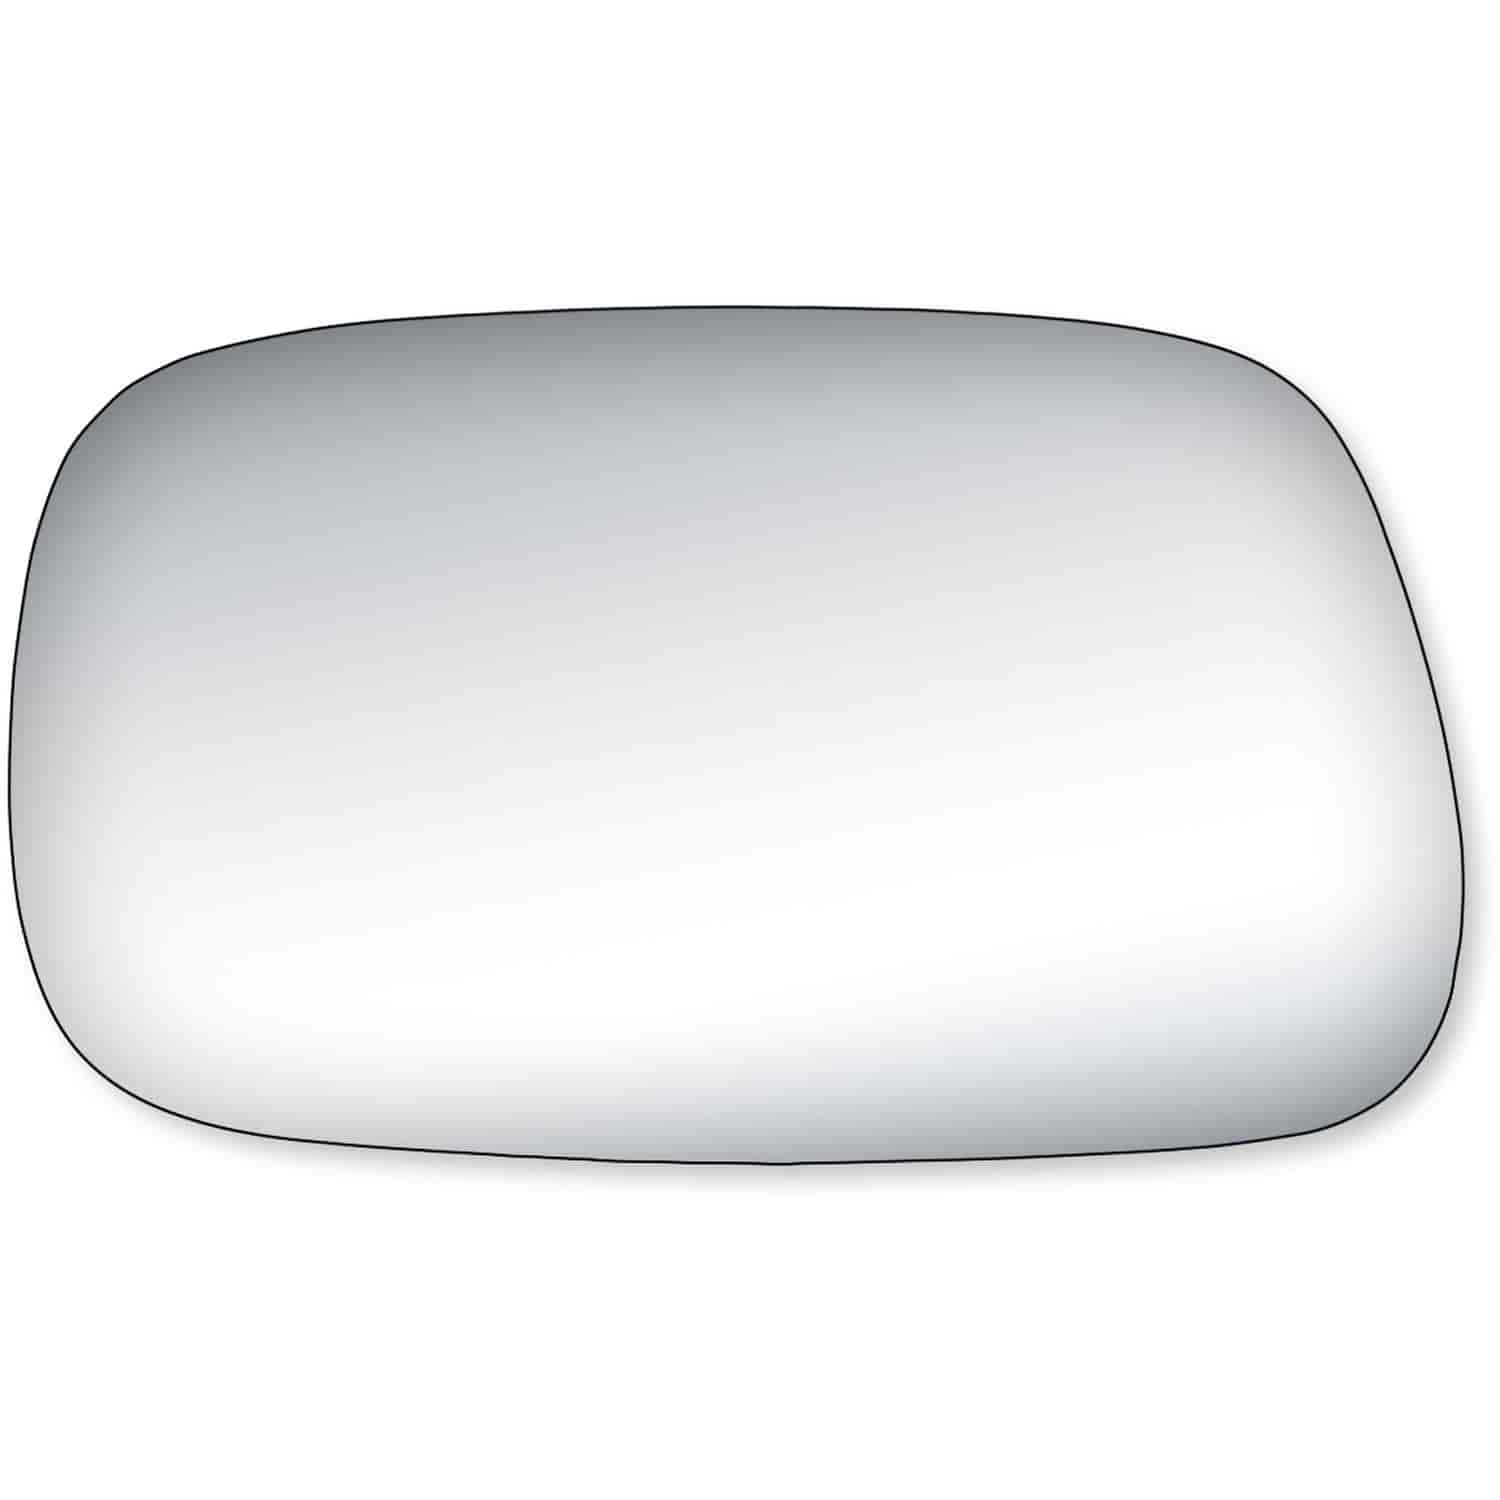 Replacement Glass for 02-06 Camry Sedan Japan Built the glass measures 3 15/16 tall by 6 5/8 wide an